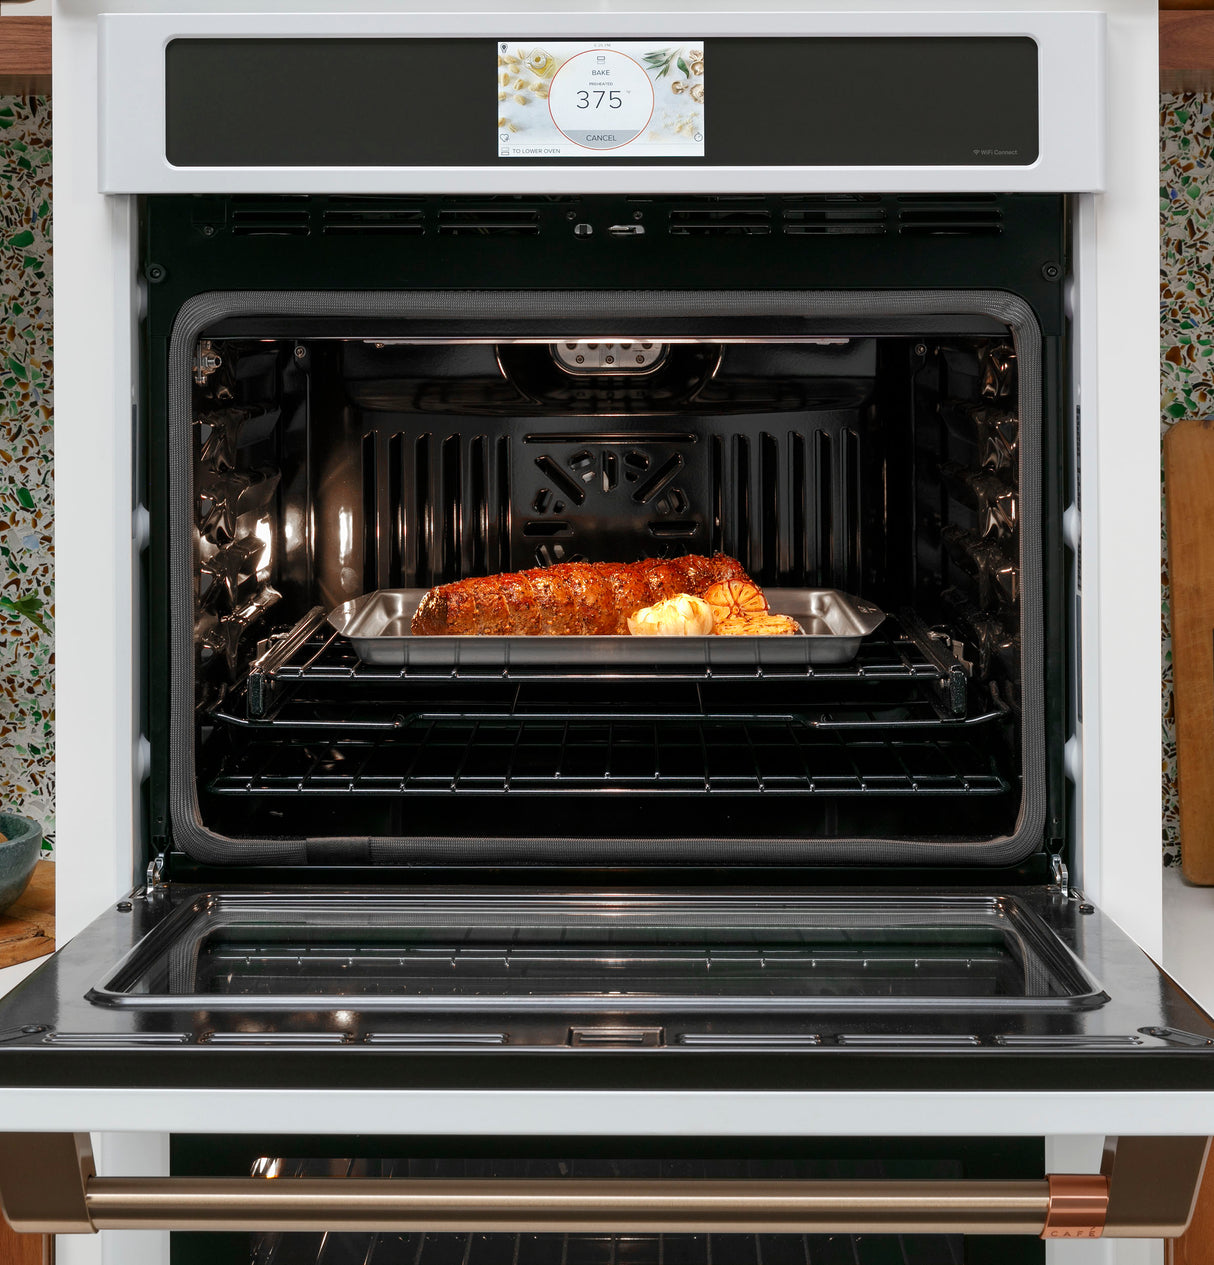 Caf(eback)(TM) Professional Series 30" Smart Built-In Convection Single Wall Oven - (CTS90DP3ND1)